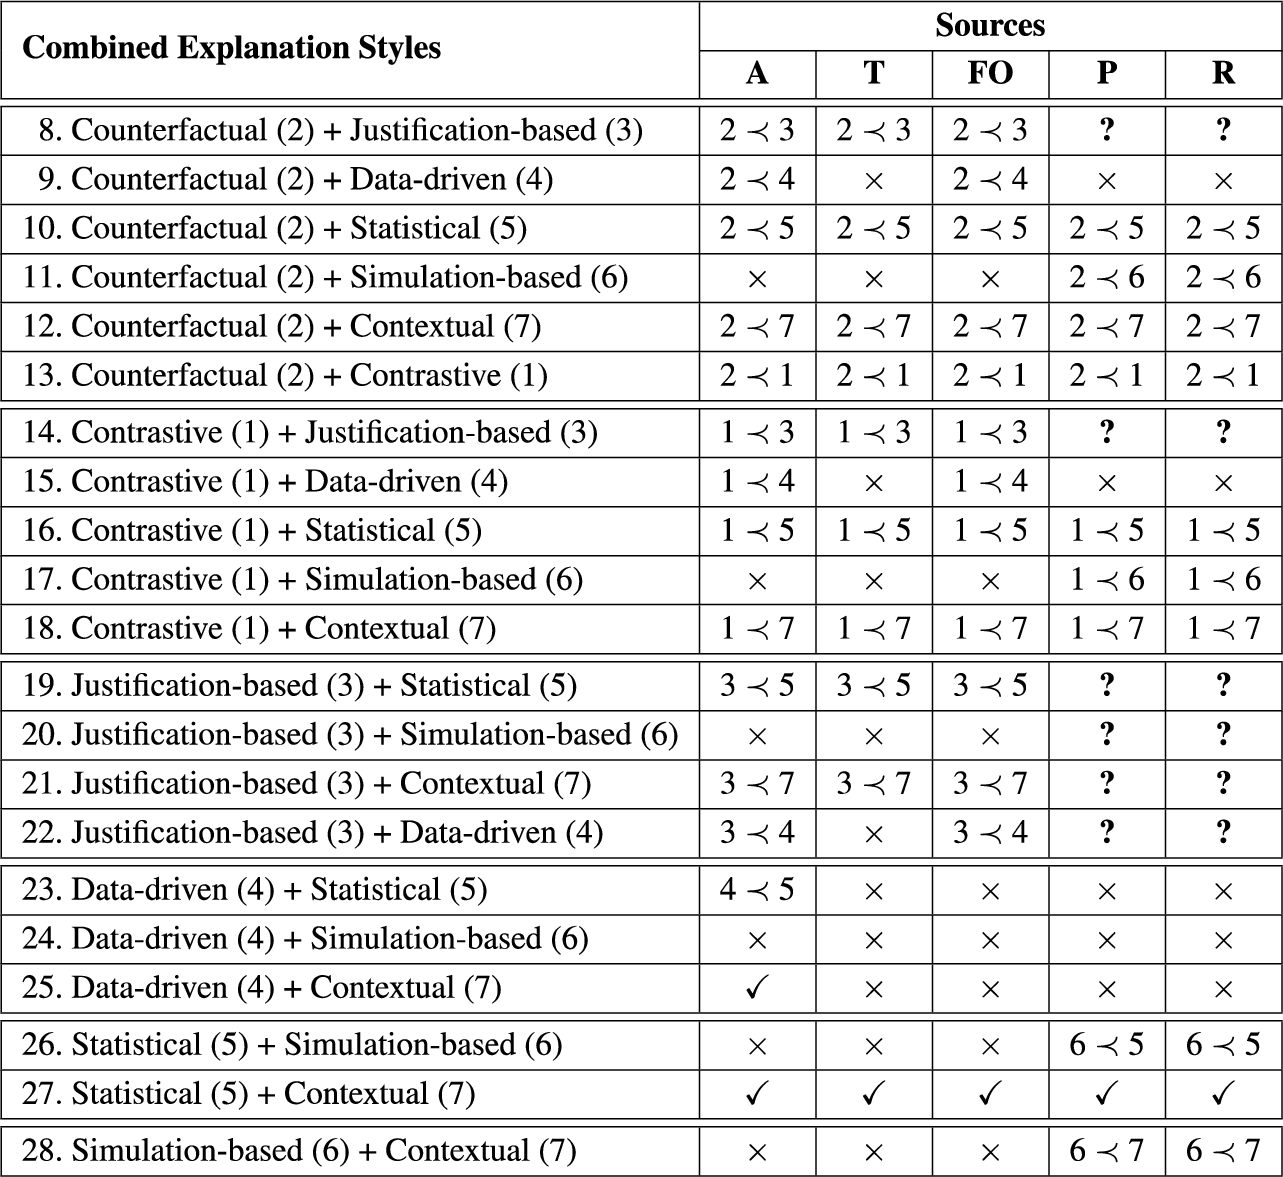 Combined explanation styles against the different types of knowledge sources that can be used in explanations. Check marks indicate that it is possible to build the explanation applying the styles in any order, while “≺” indicates that a specific order must be followed. Finally, × and ? indicate that the combination of styles and source is not possible (or not fully explored), respectively.